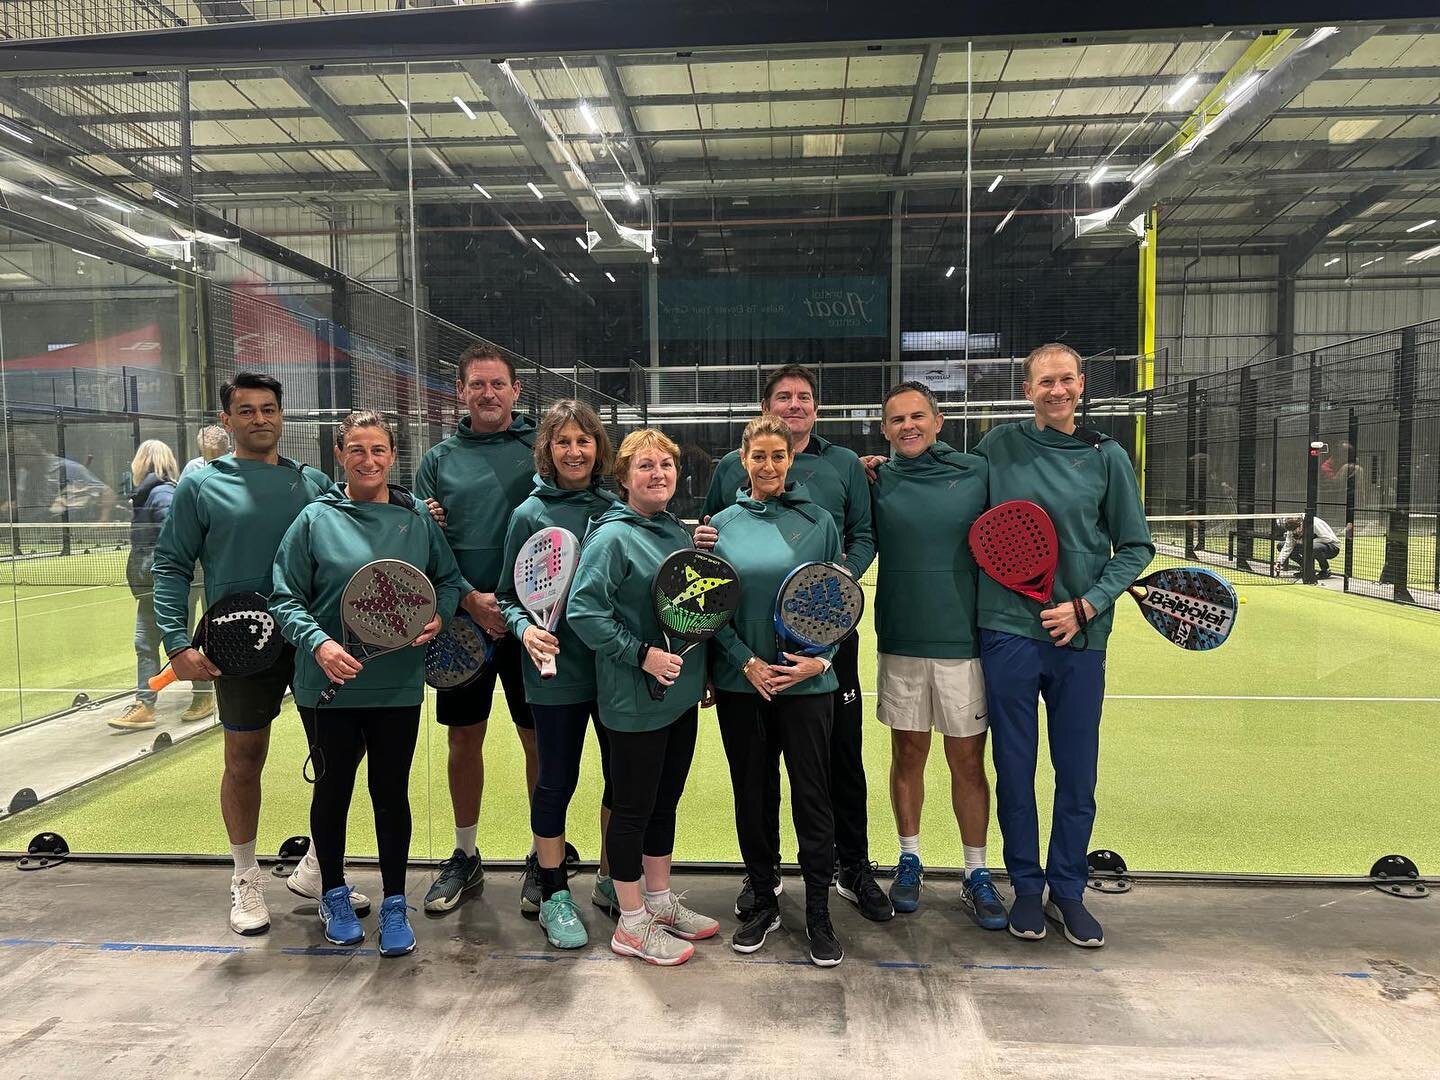 Best of luck to the very youthful looking Cheshire Over 50&rsquo;s team, who are competing today at the @uk_padel County Championships 🏆💪🎾